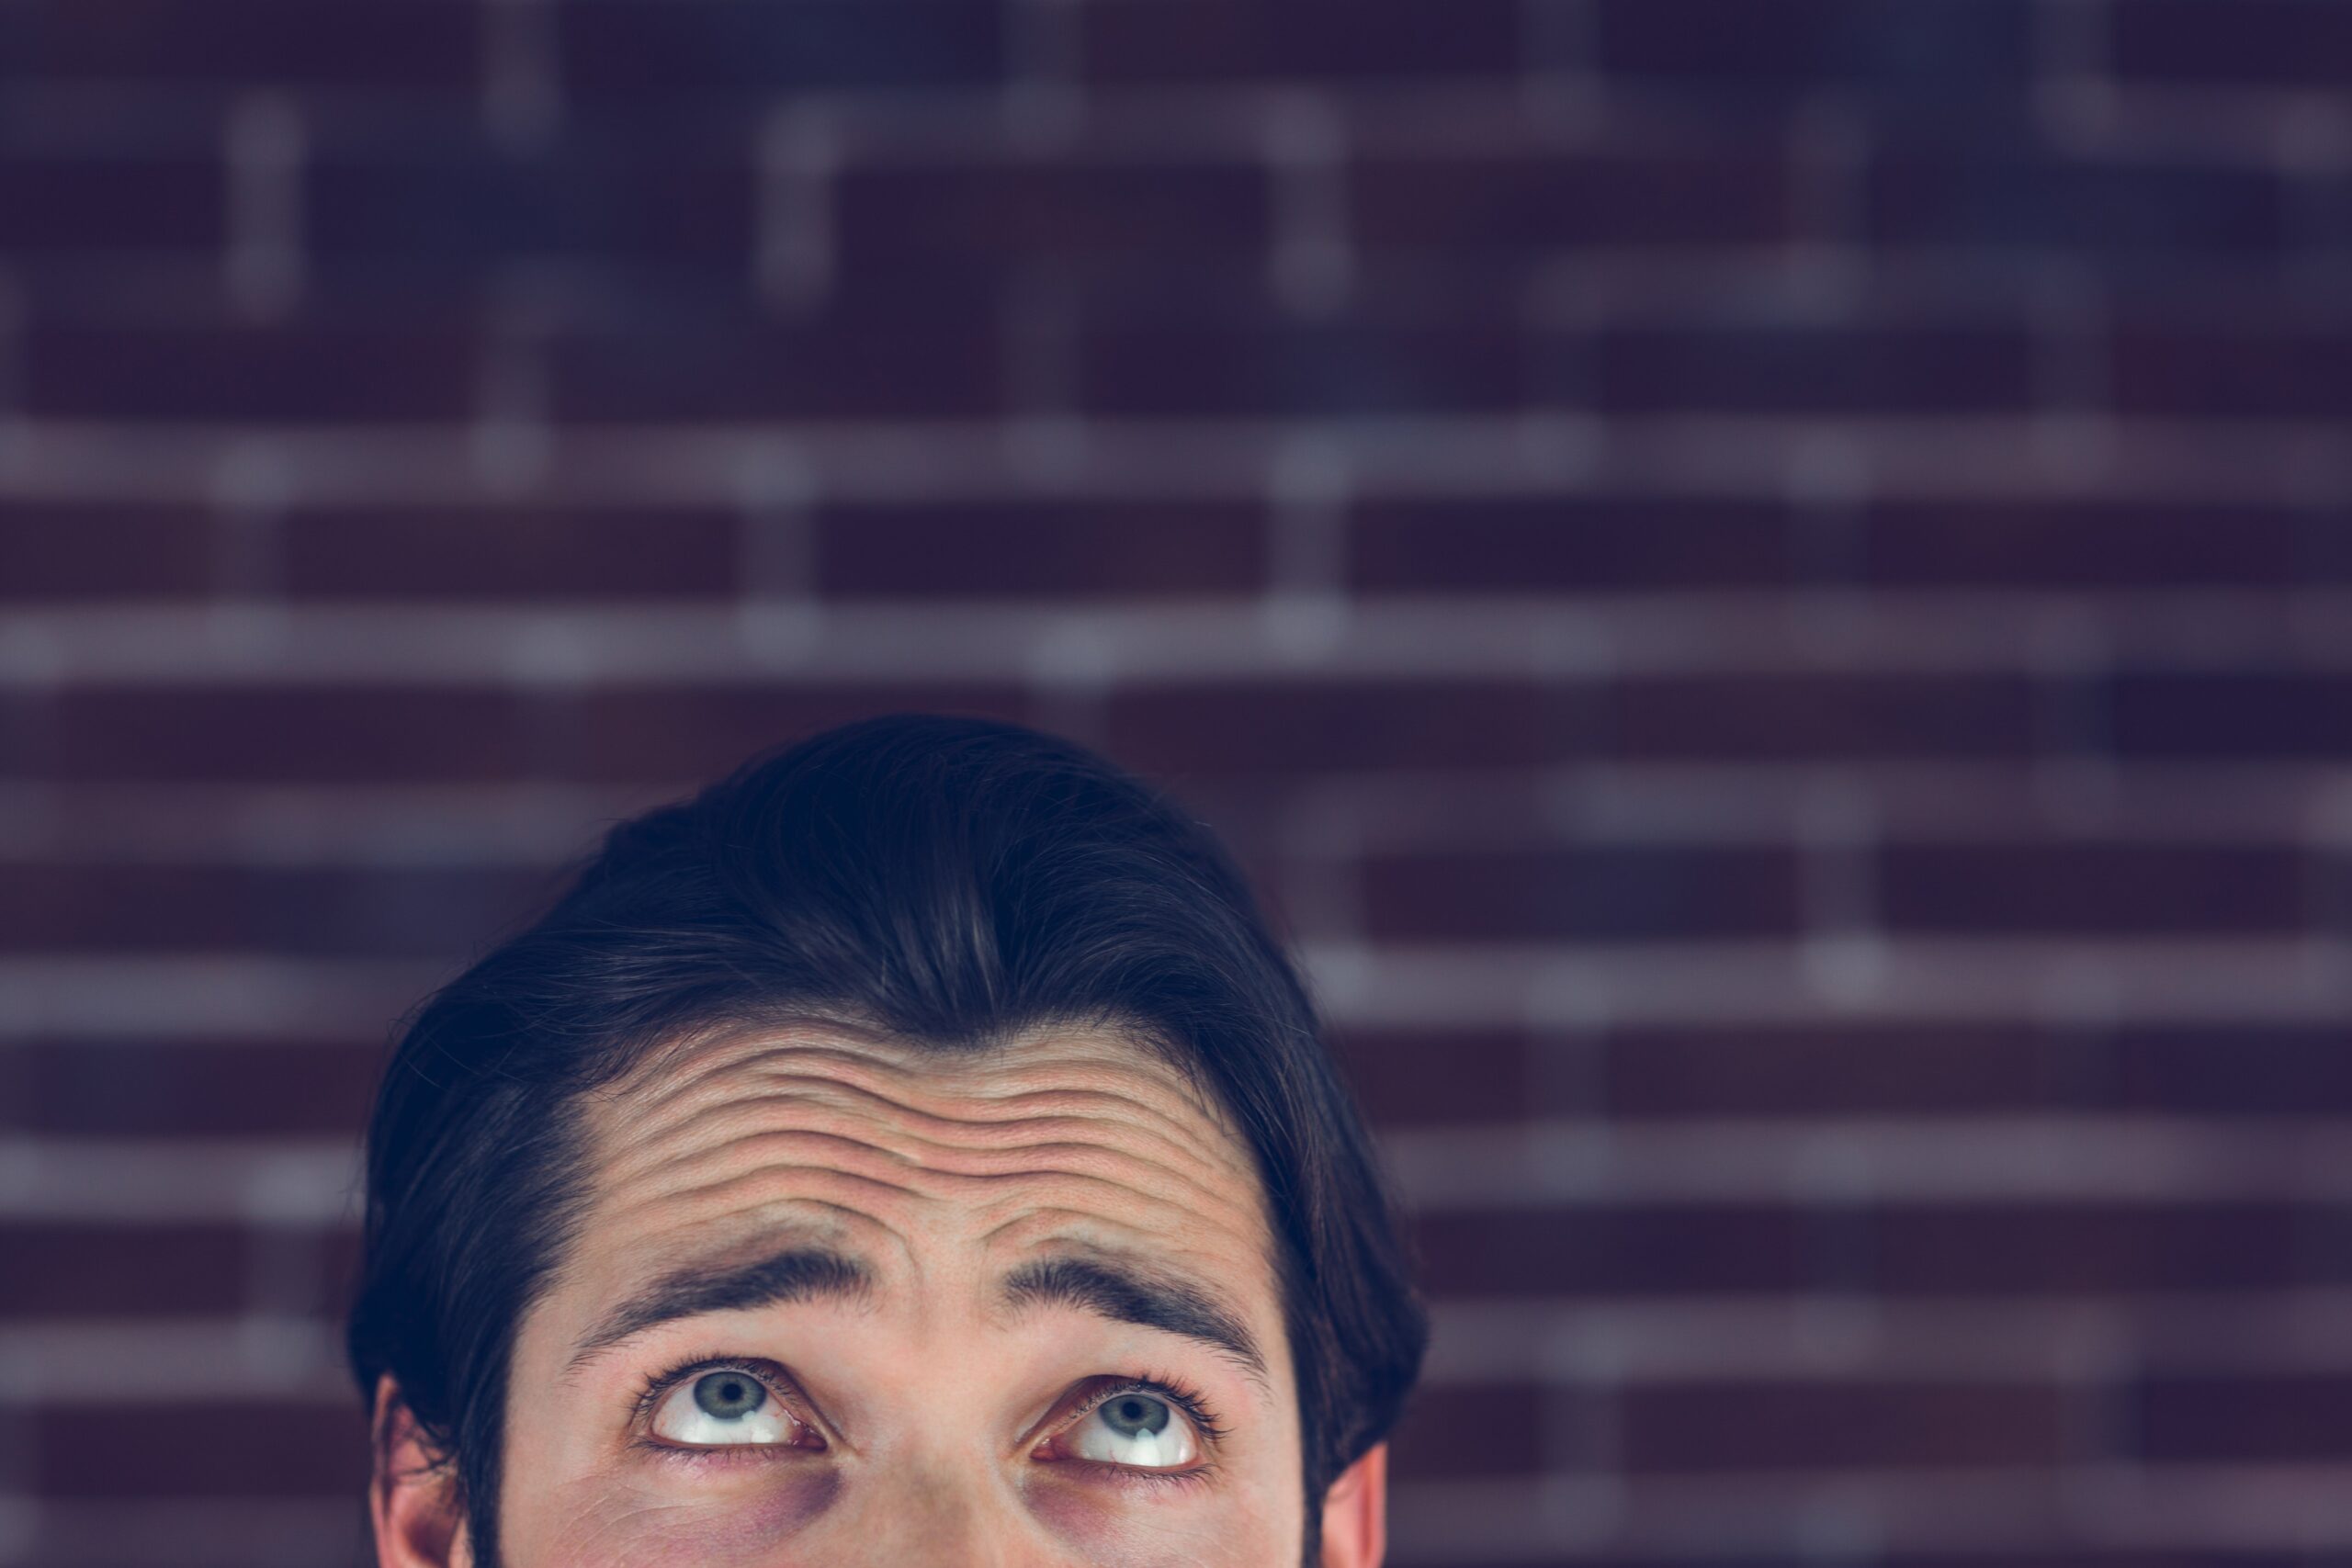 Man In Front Of Brick Wall Staring Up